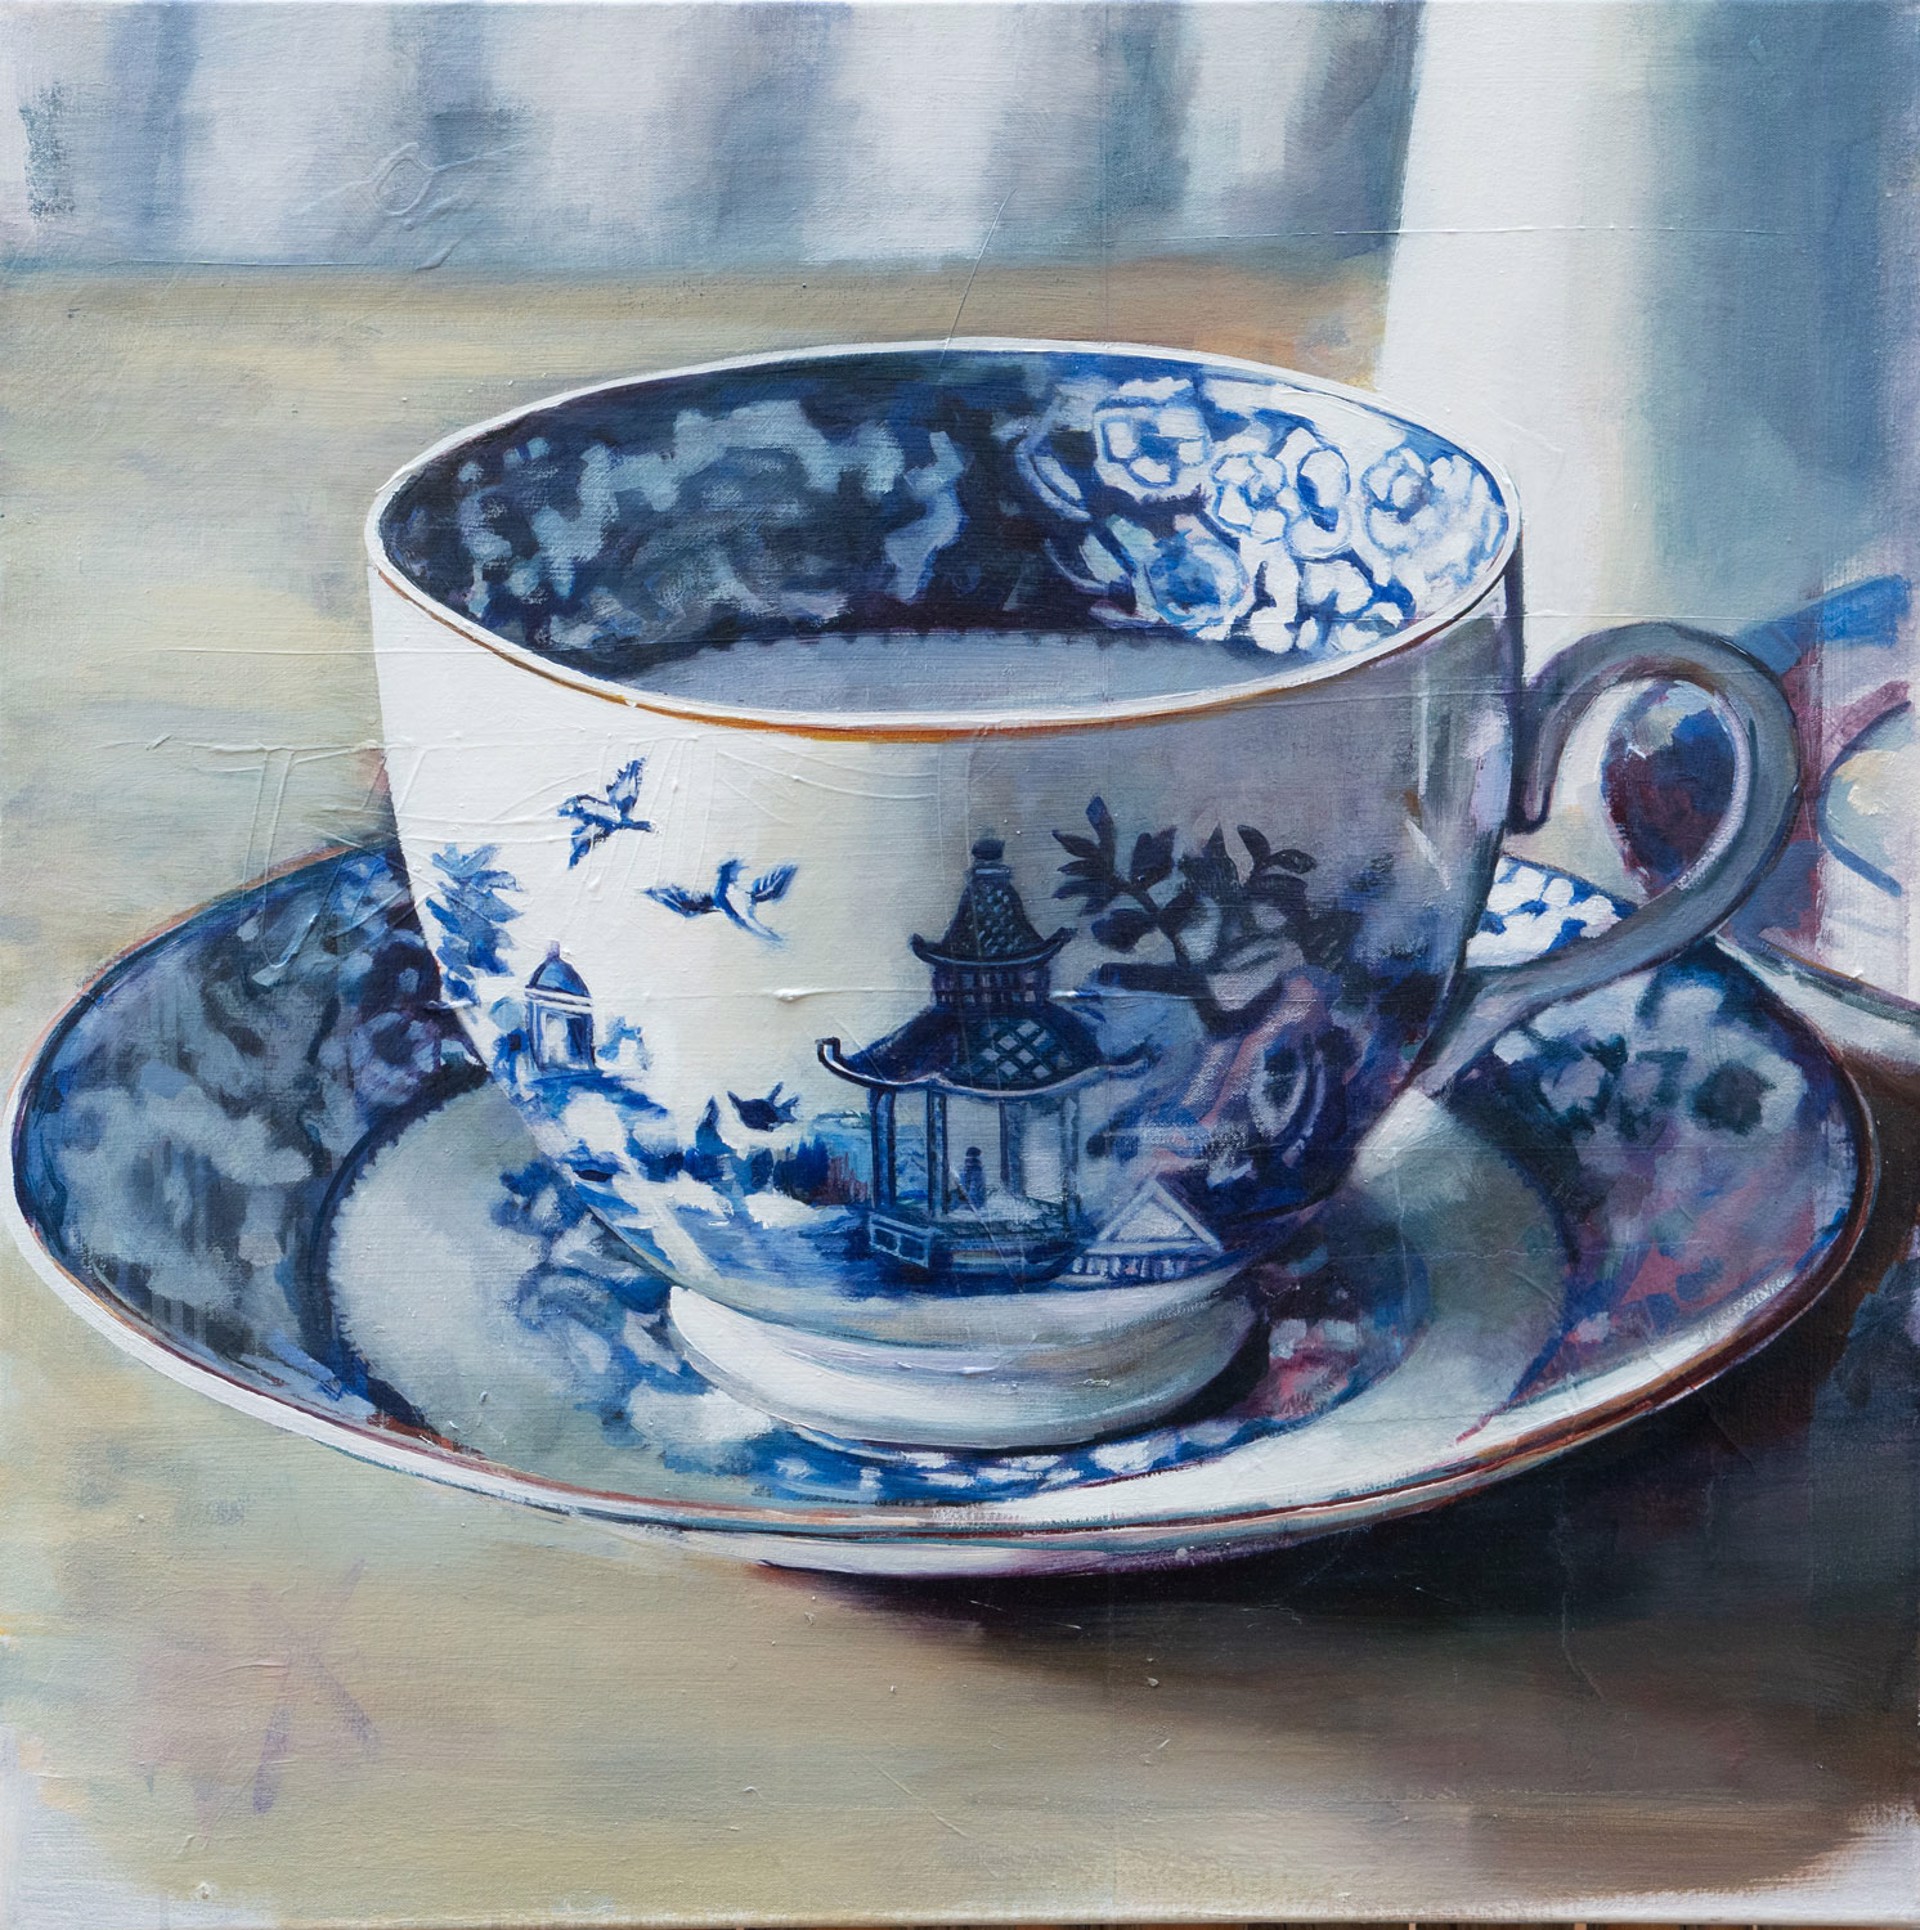 Storm in a Teacup by Tucker Eason